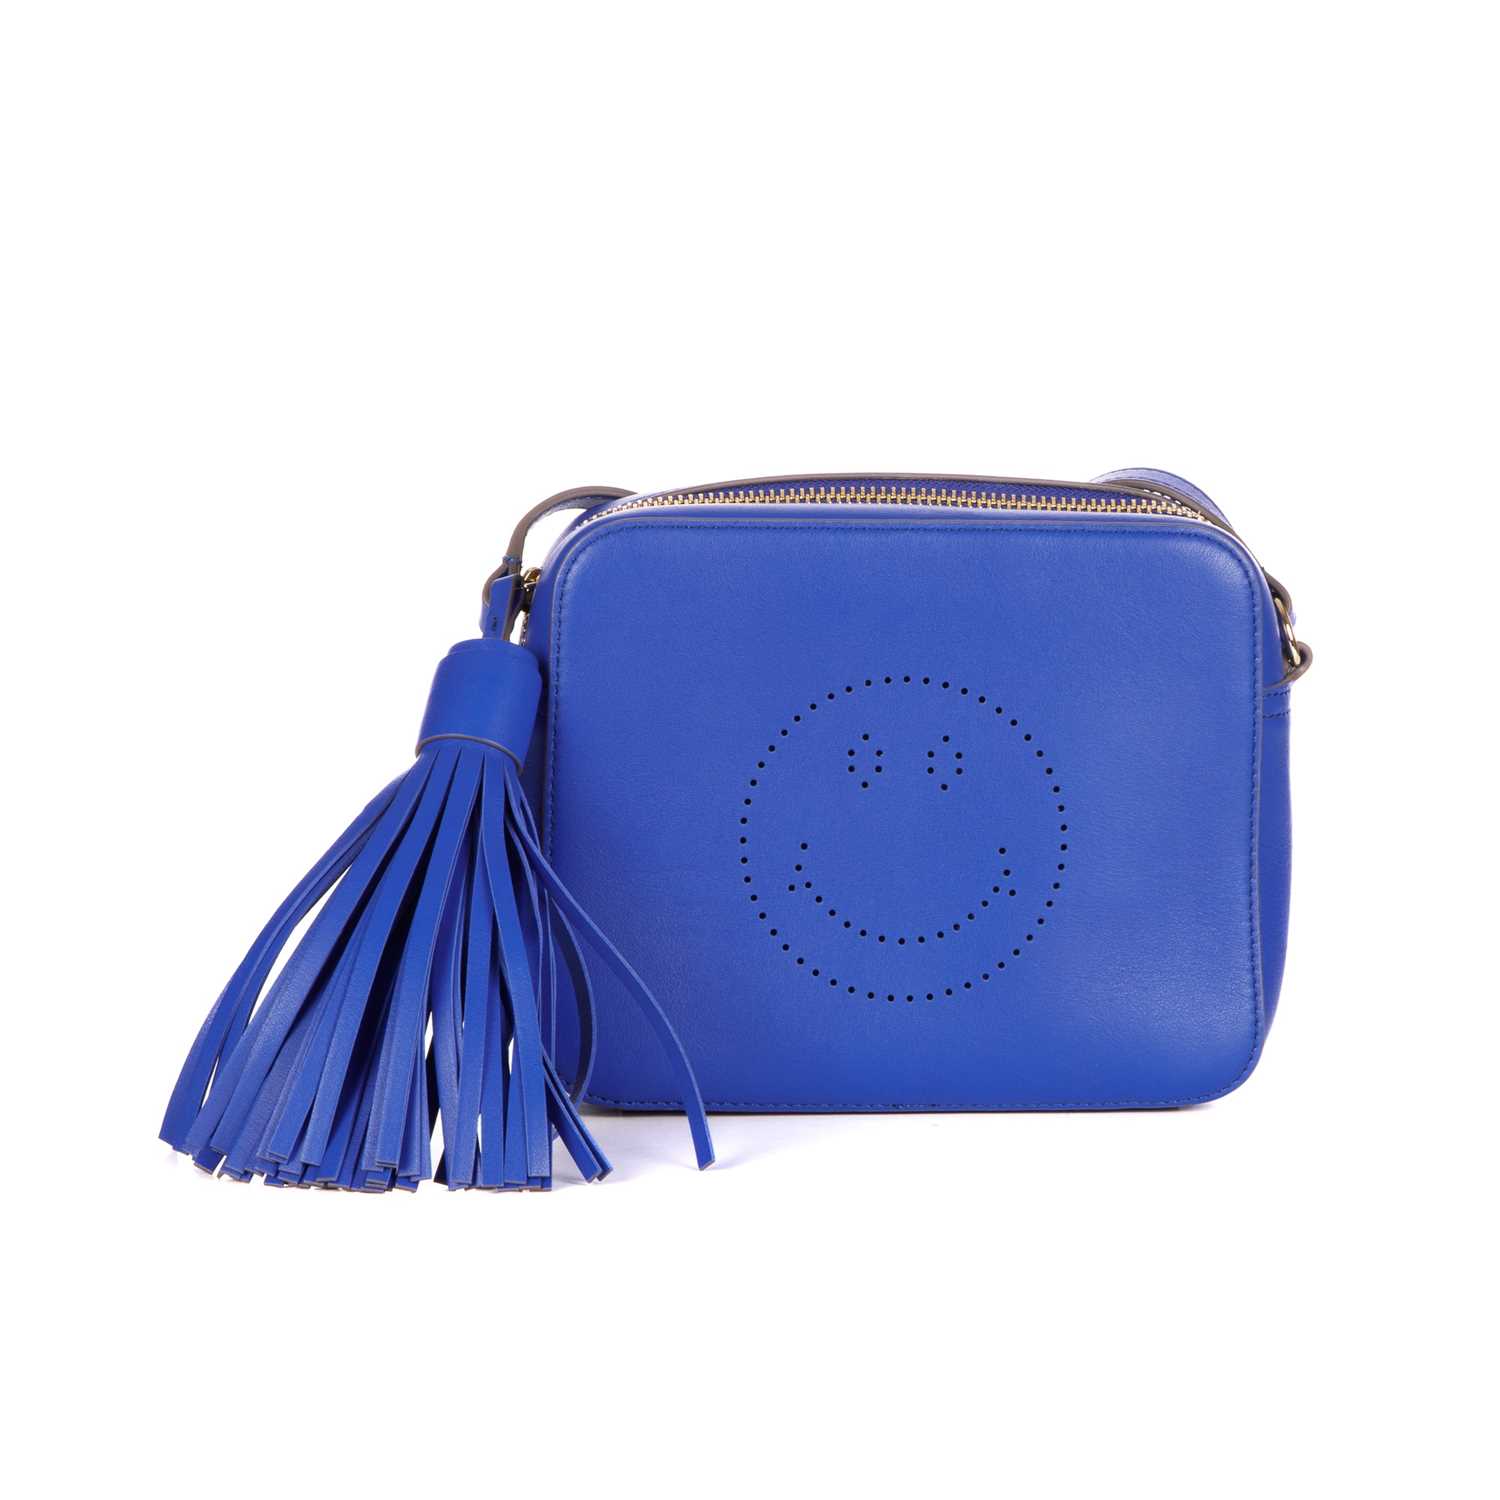 Anya Hindmarch, a blue Smiley crossbody handbag, crafted from smooth electric blue leather,